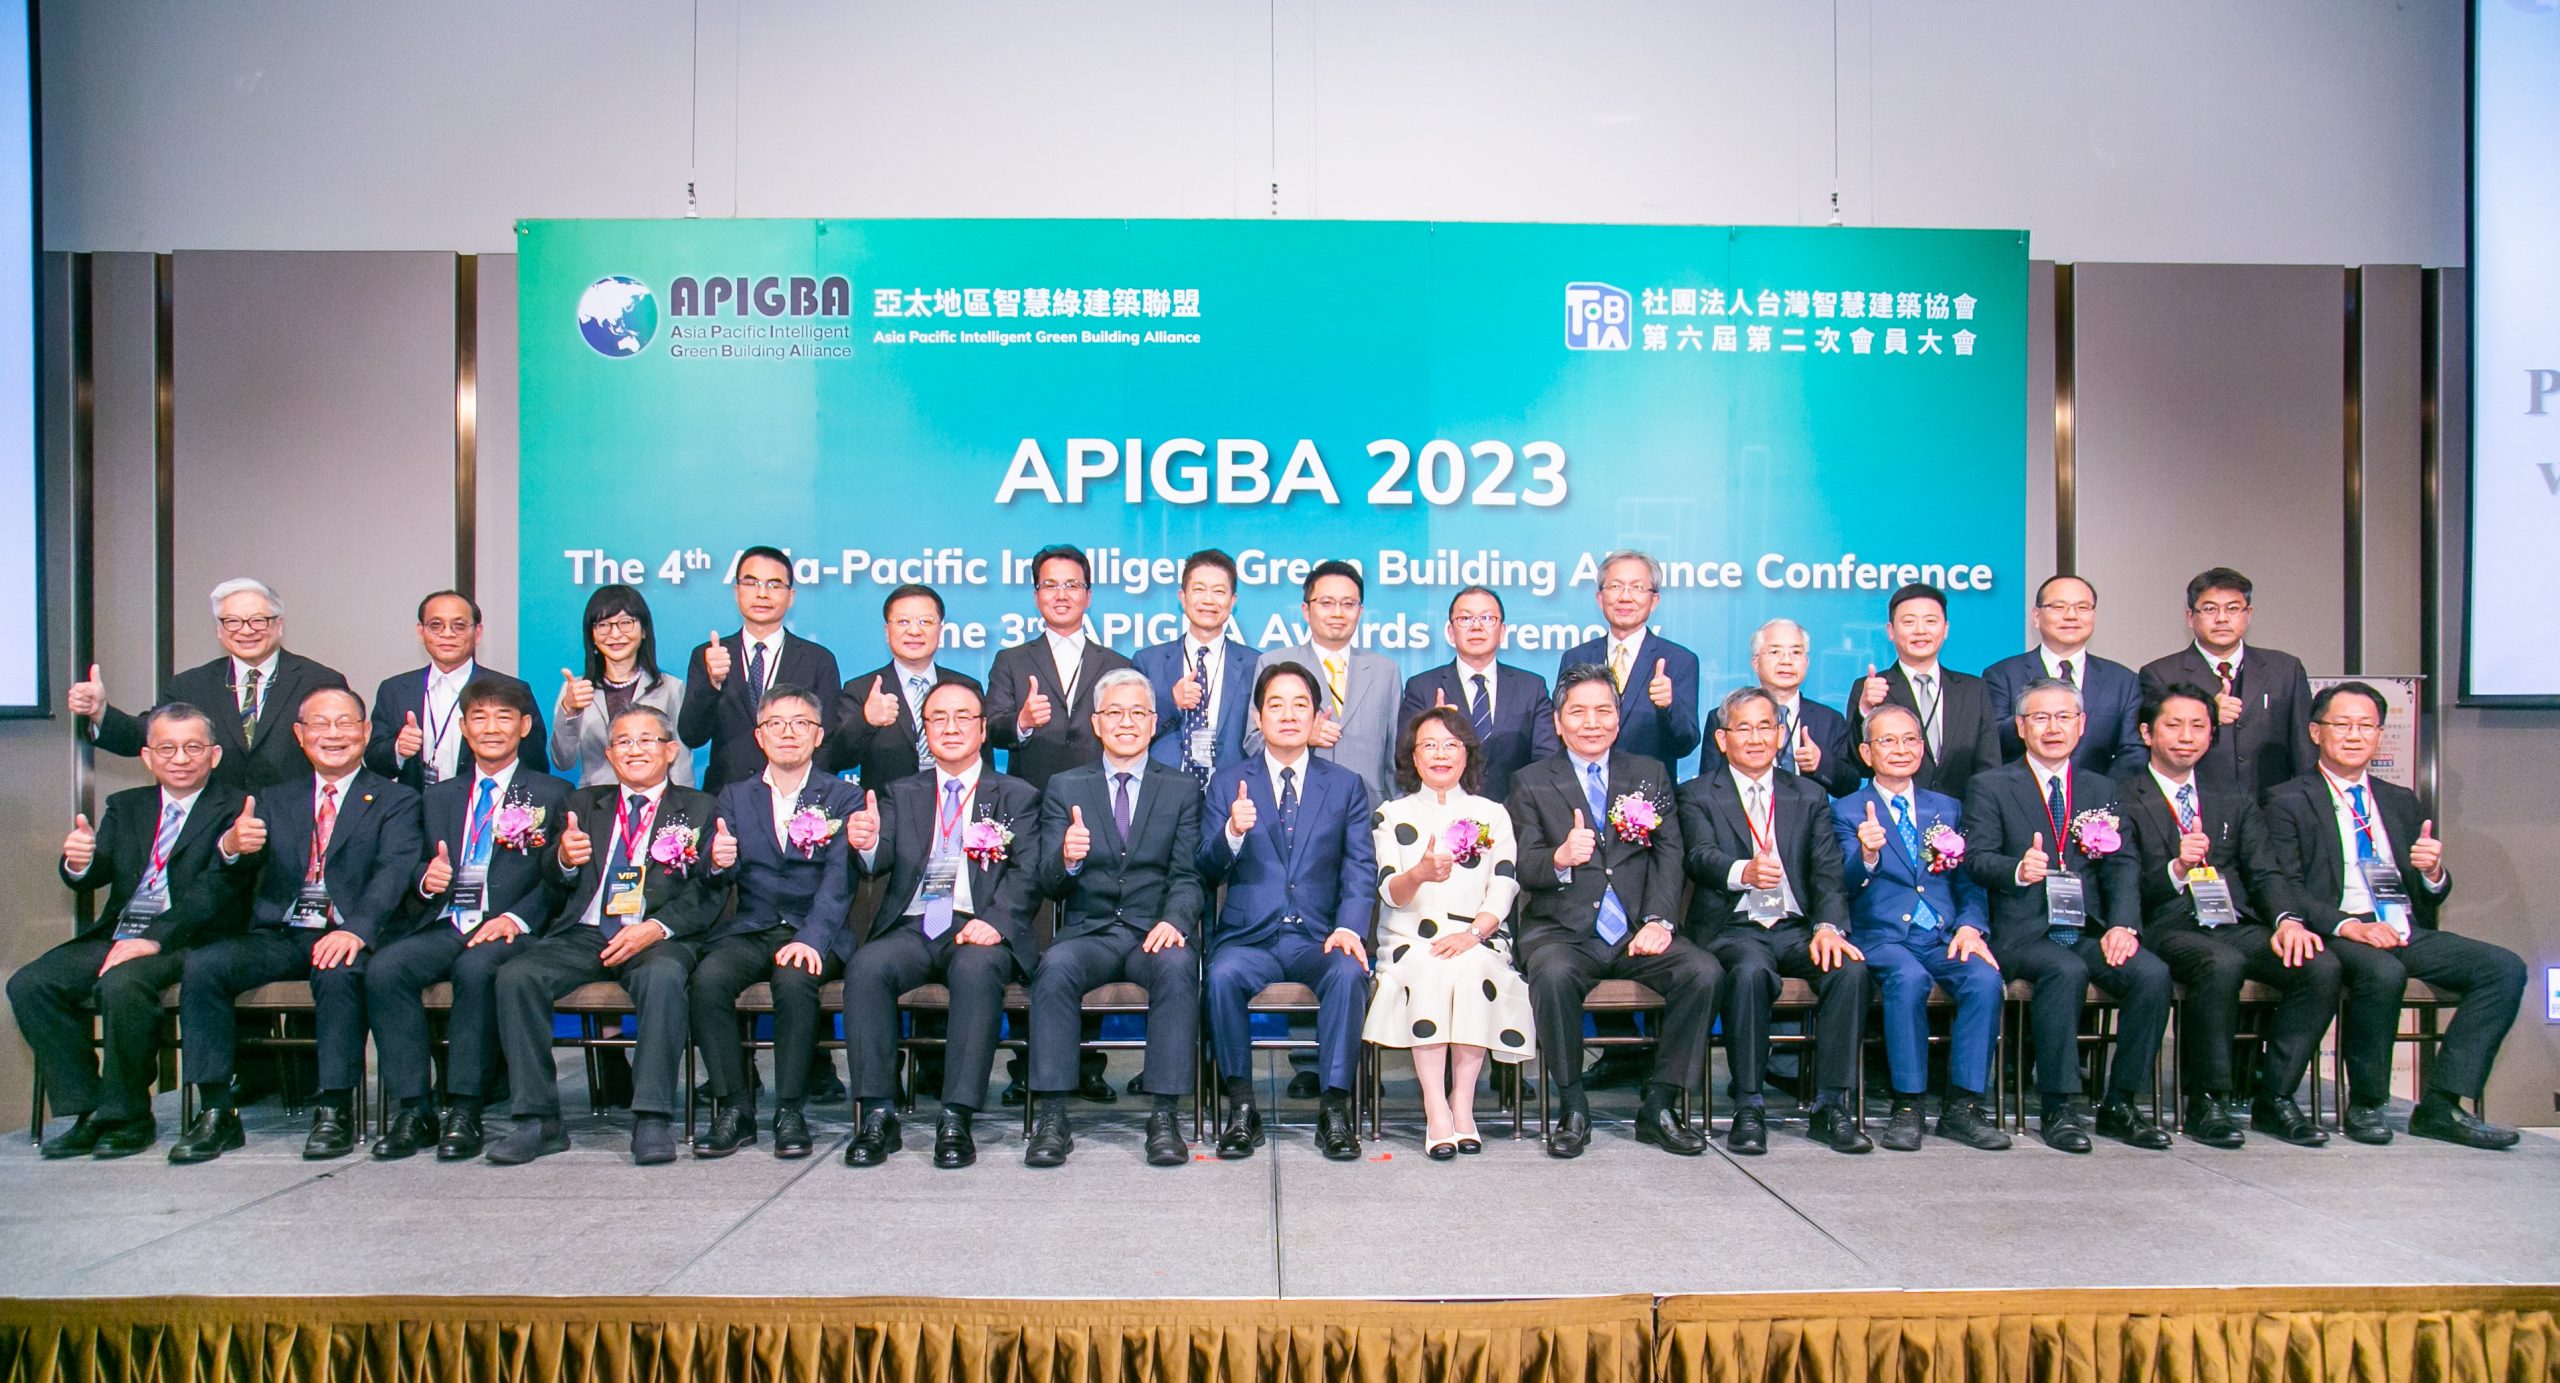 The 4th Asia-Pacific Intelligent Green Building Alliance Conference and the 3rd APIGBA Awards Ceremony